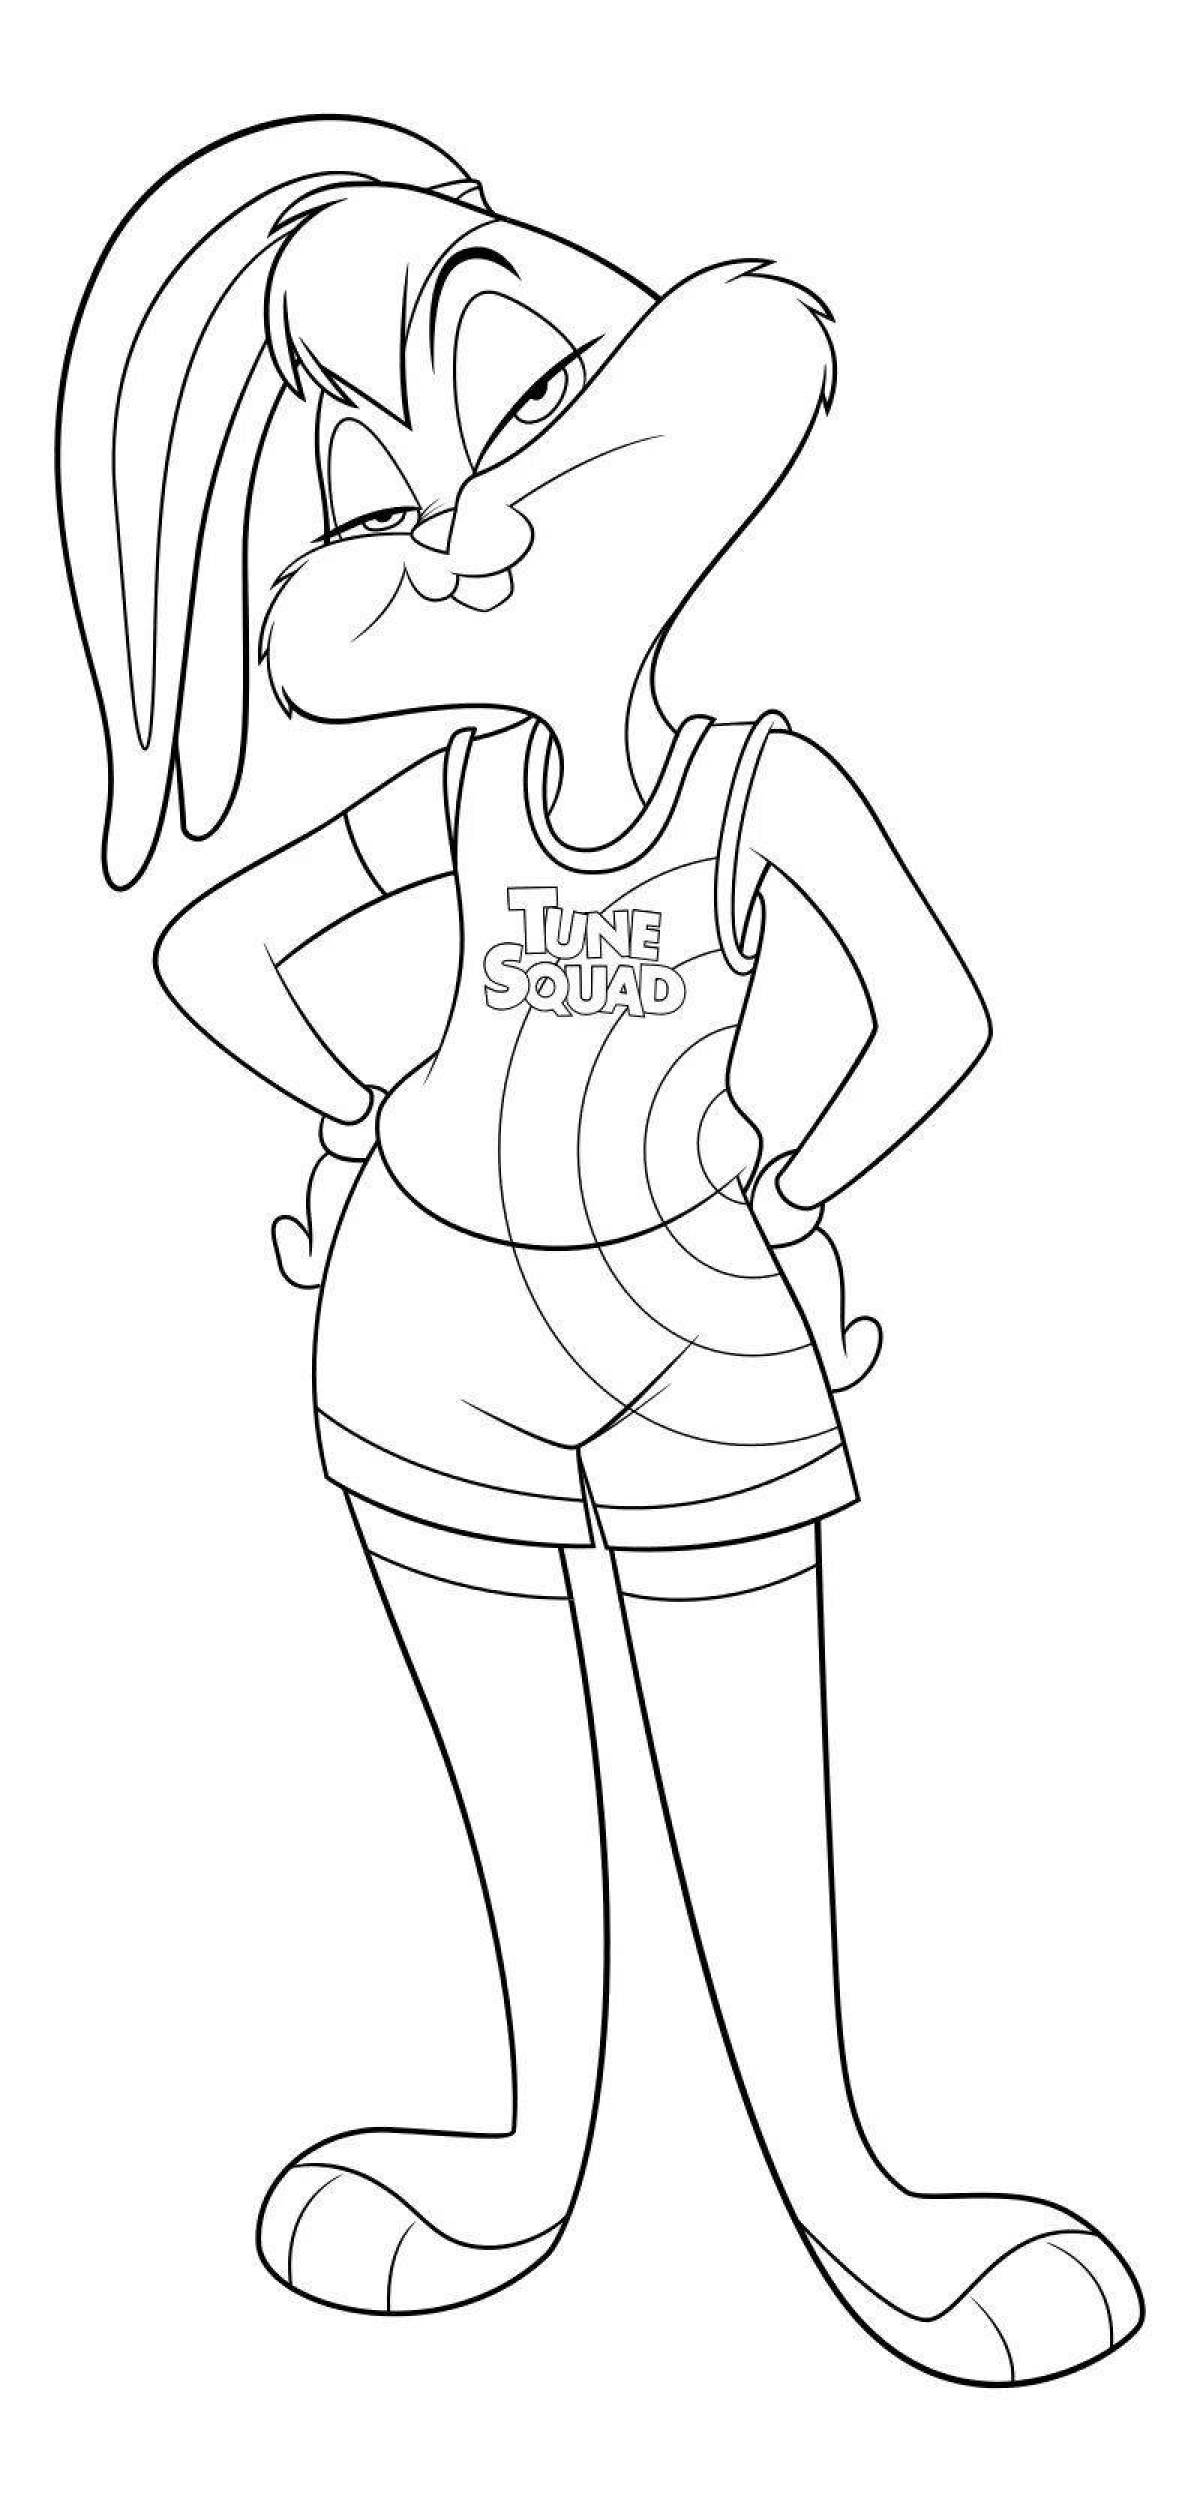 Coloring page of outgoing lola bunny